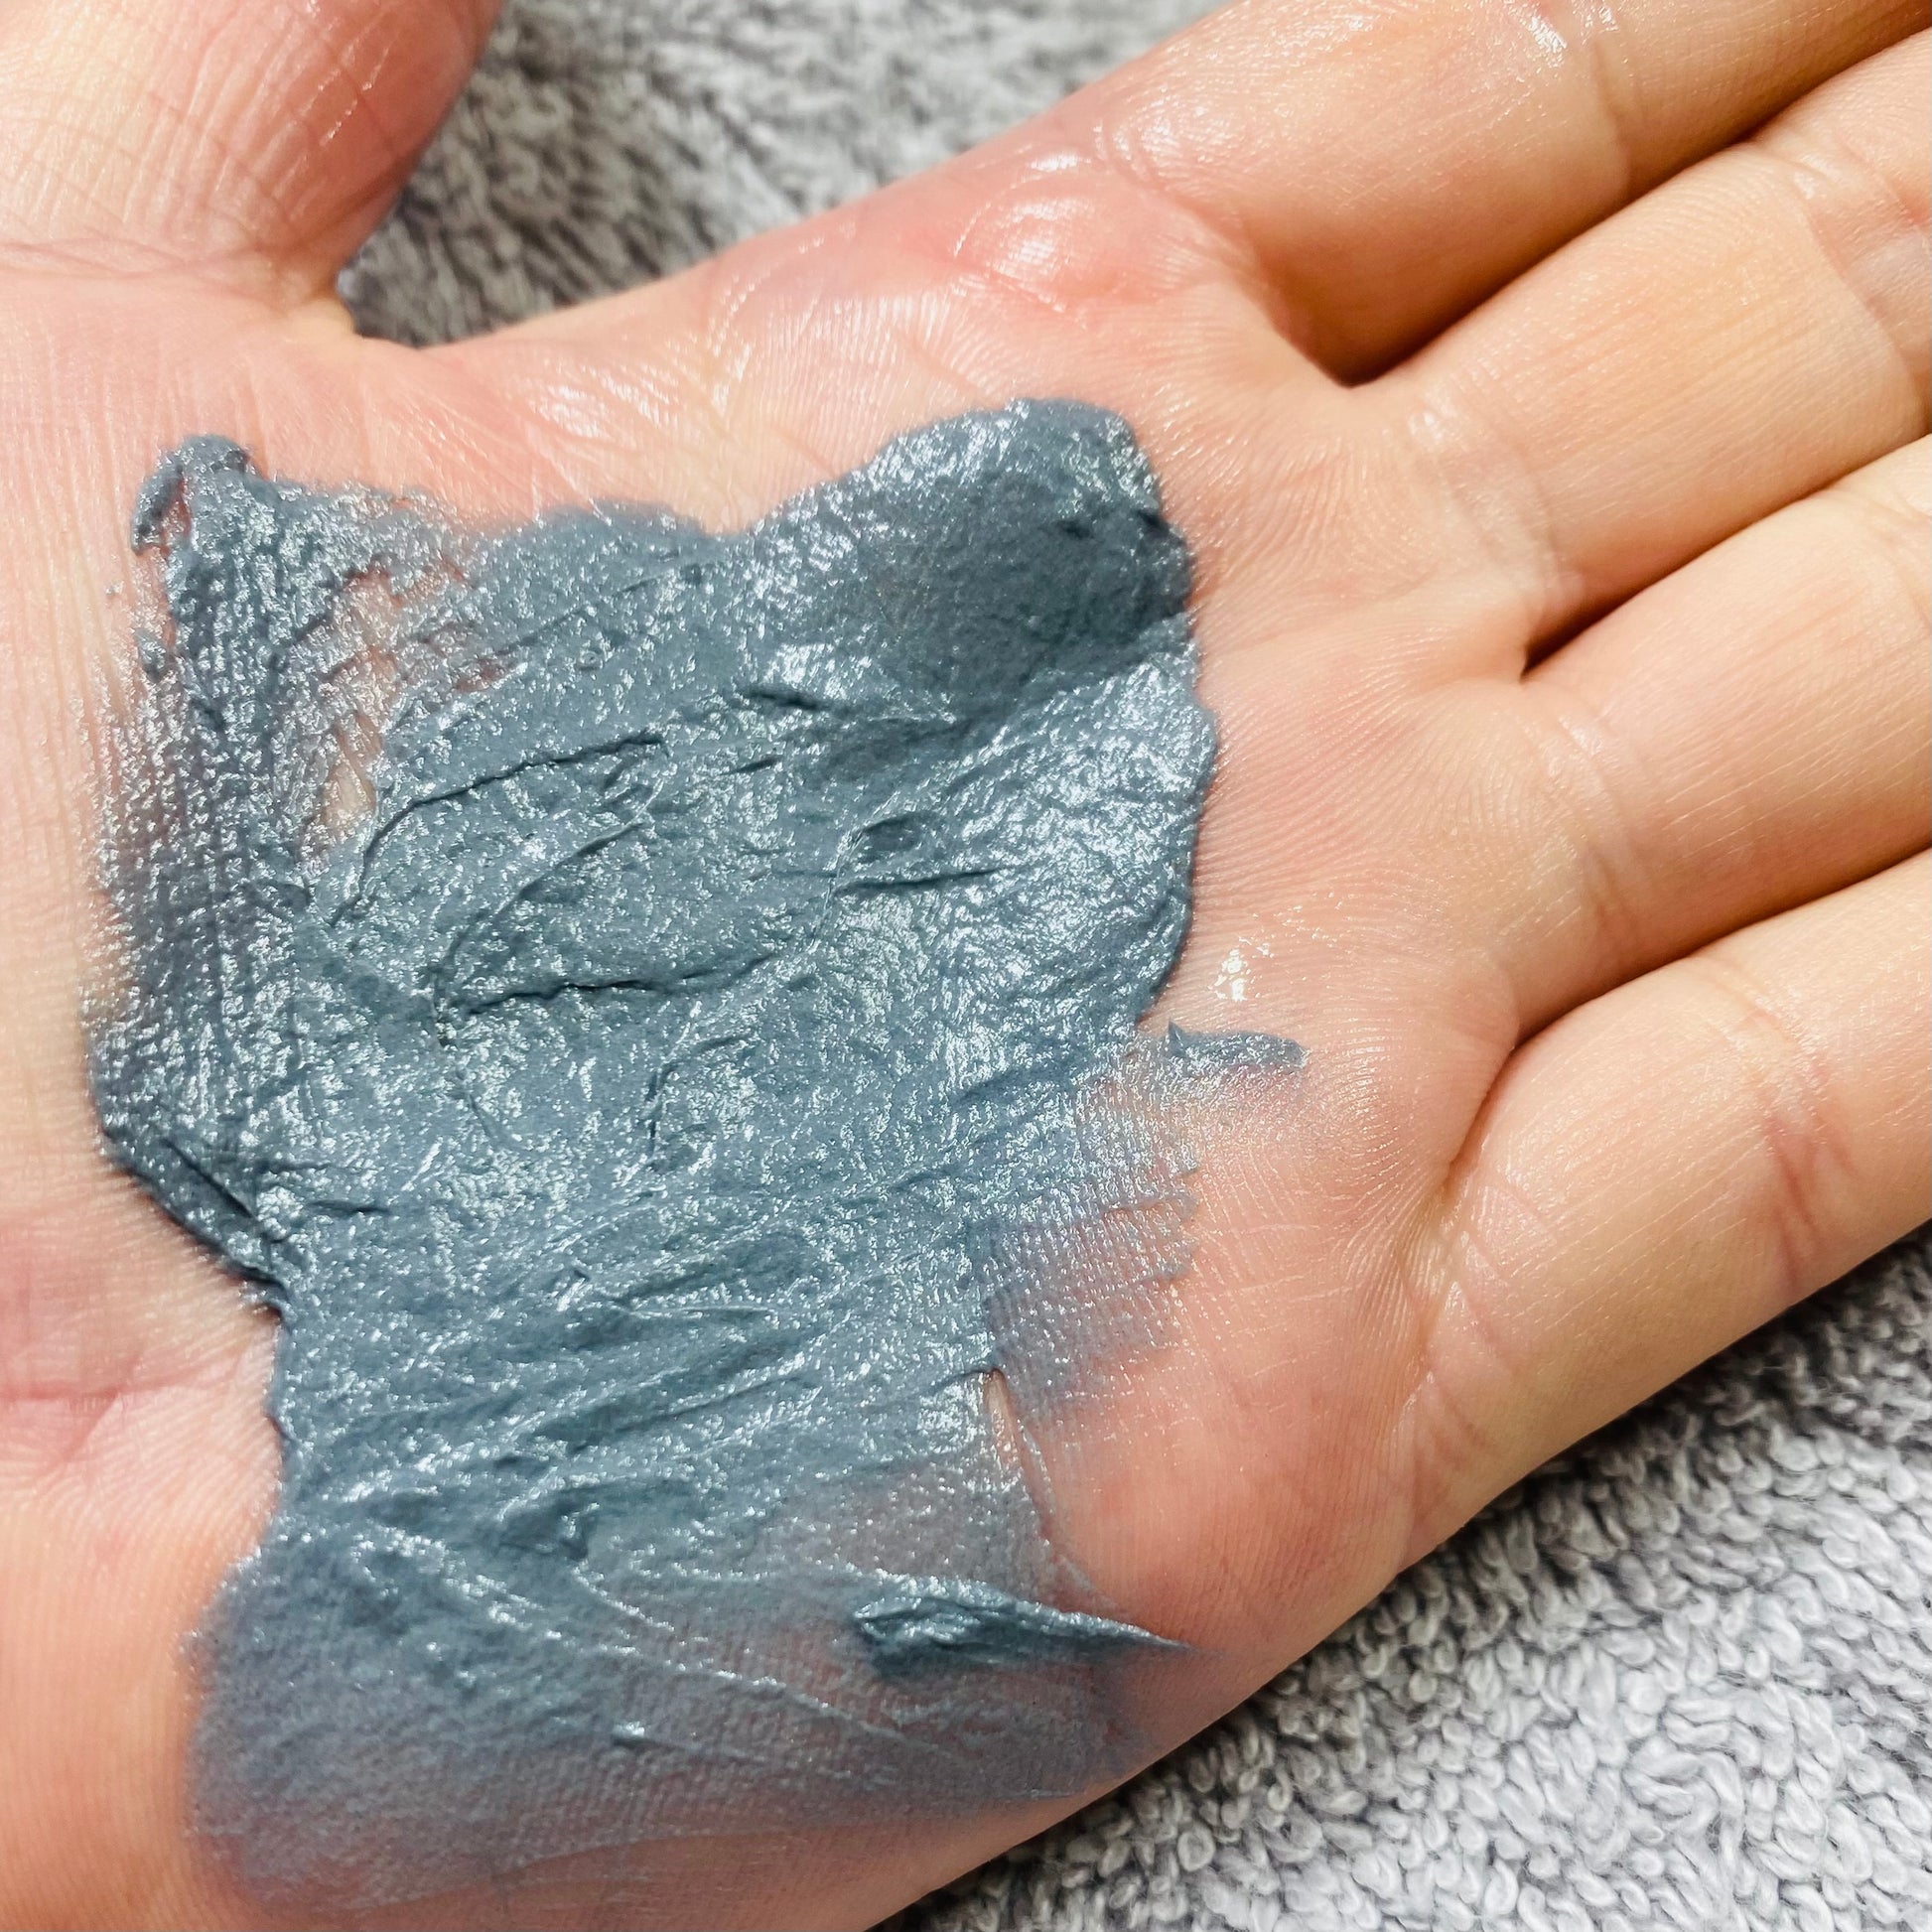 active clay cleanser spread on the palm of my hand